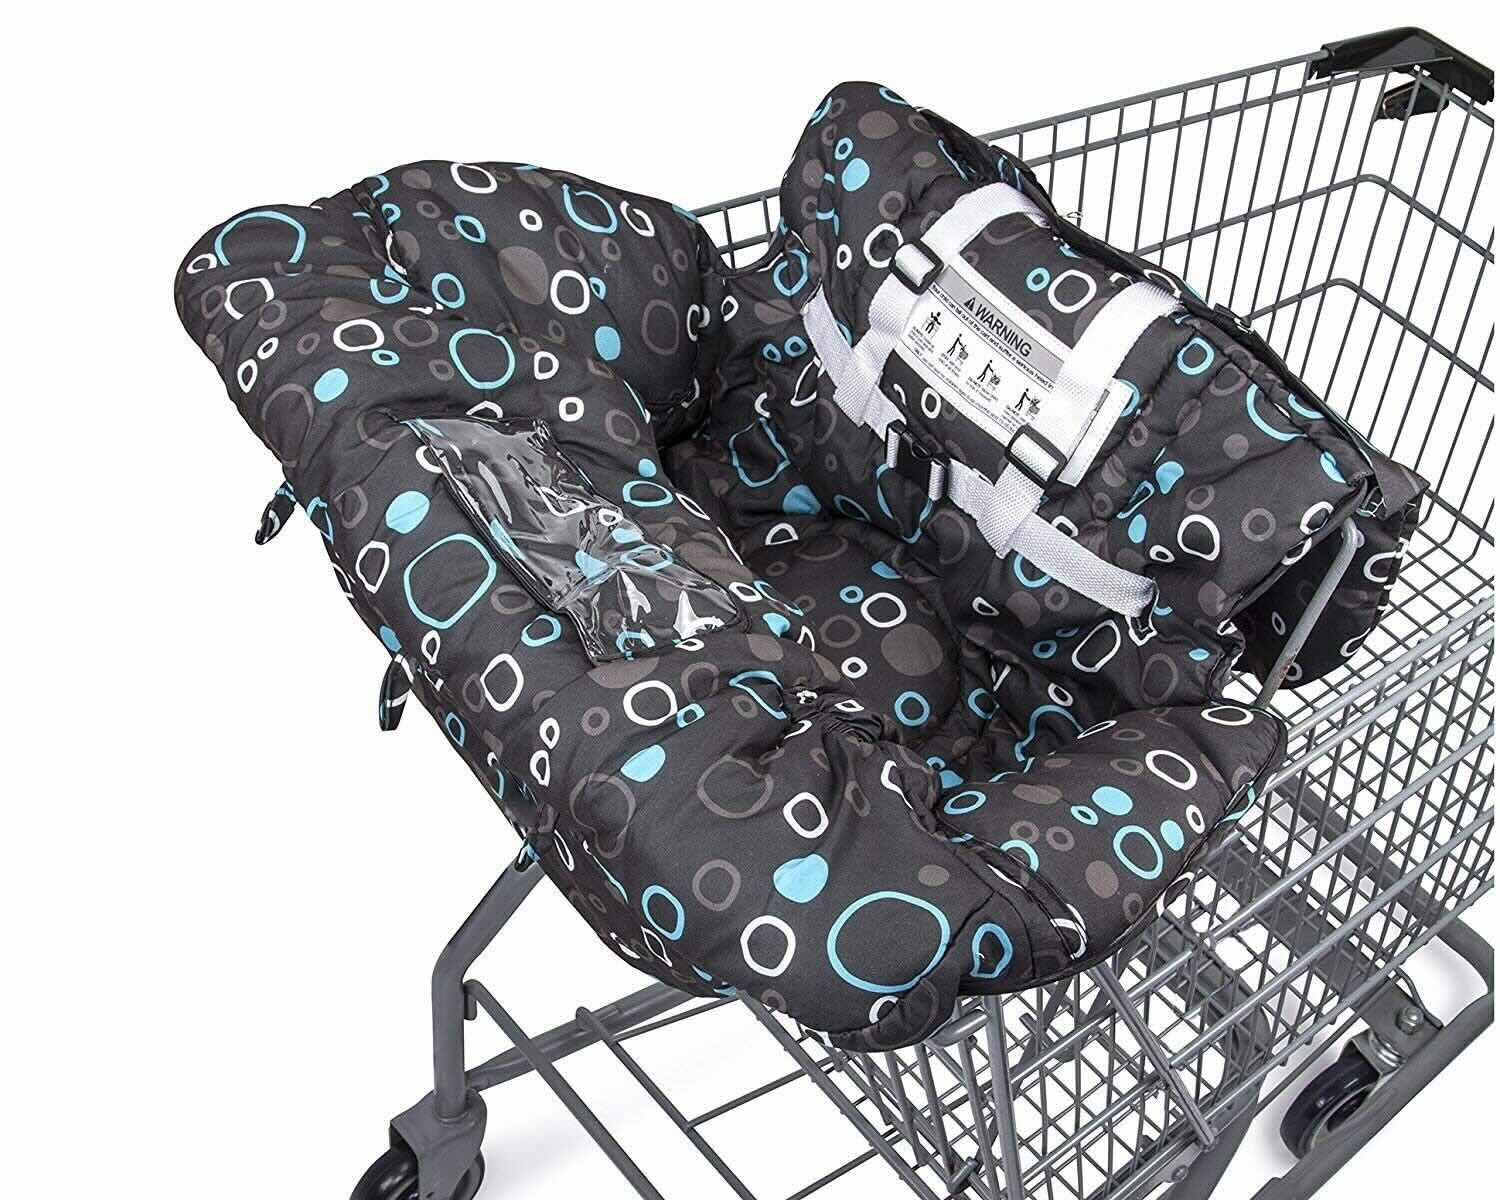 Shopping Cart Cover Review: A Must-Have for Safe and Clean Shopping